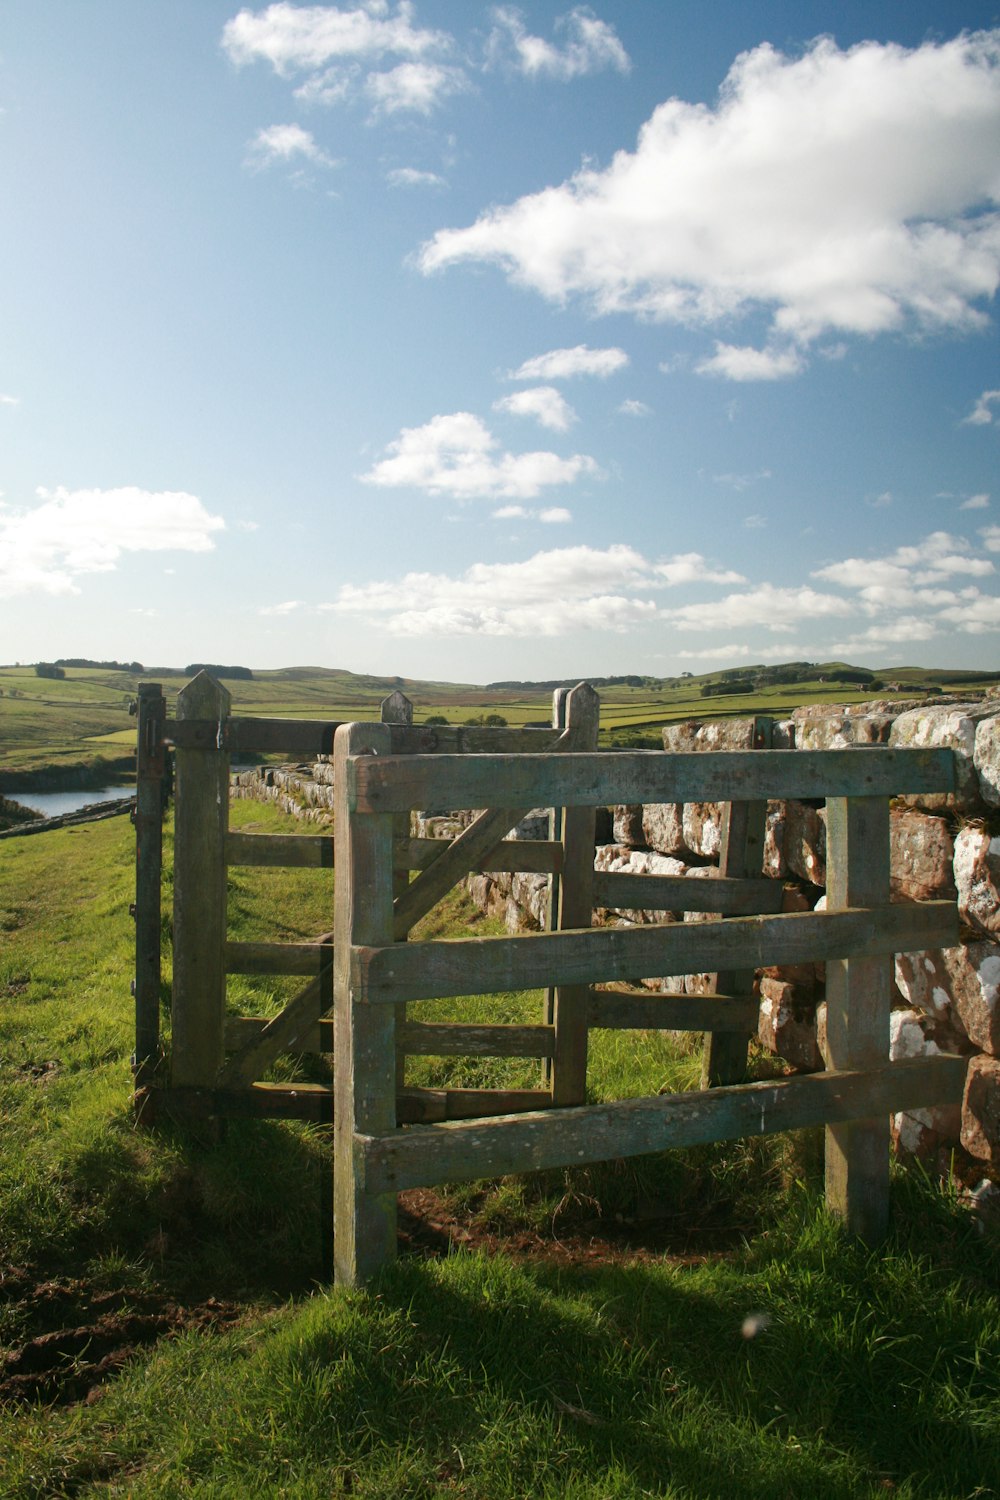 a wooden gate in a grassy field with sheep